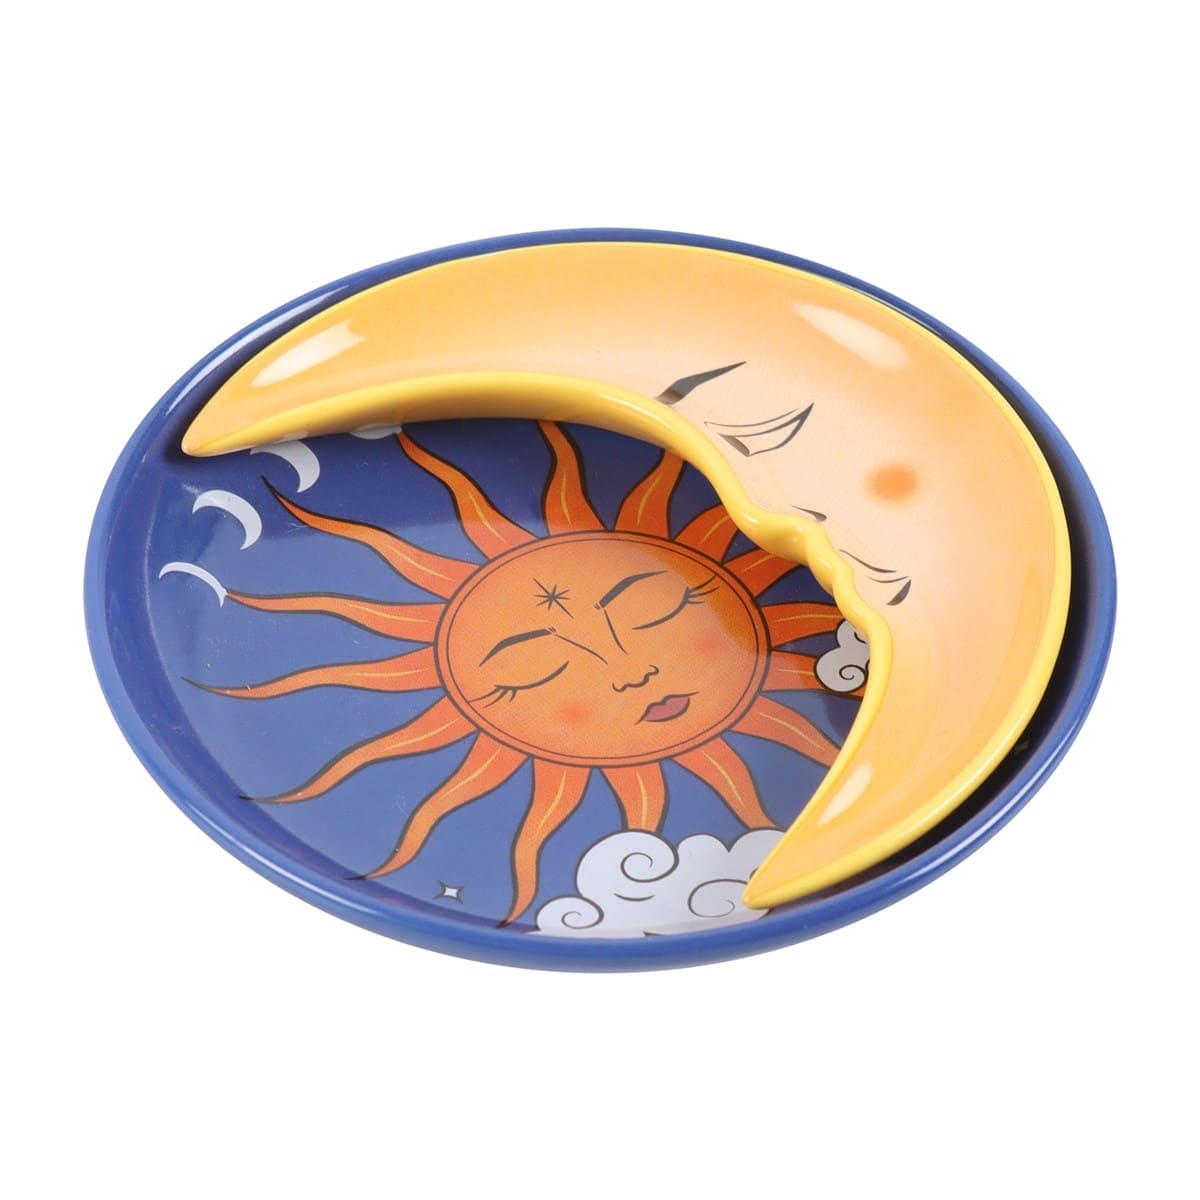 Sun and Moon Celestial Stacking Trinket Dish, Idea Gift for Mothers Day - by Spirit of equinox